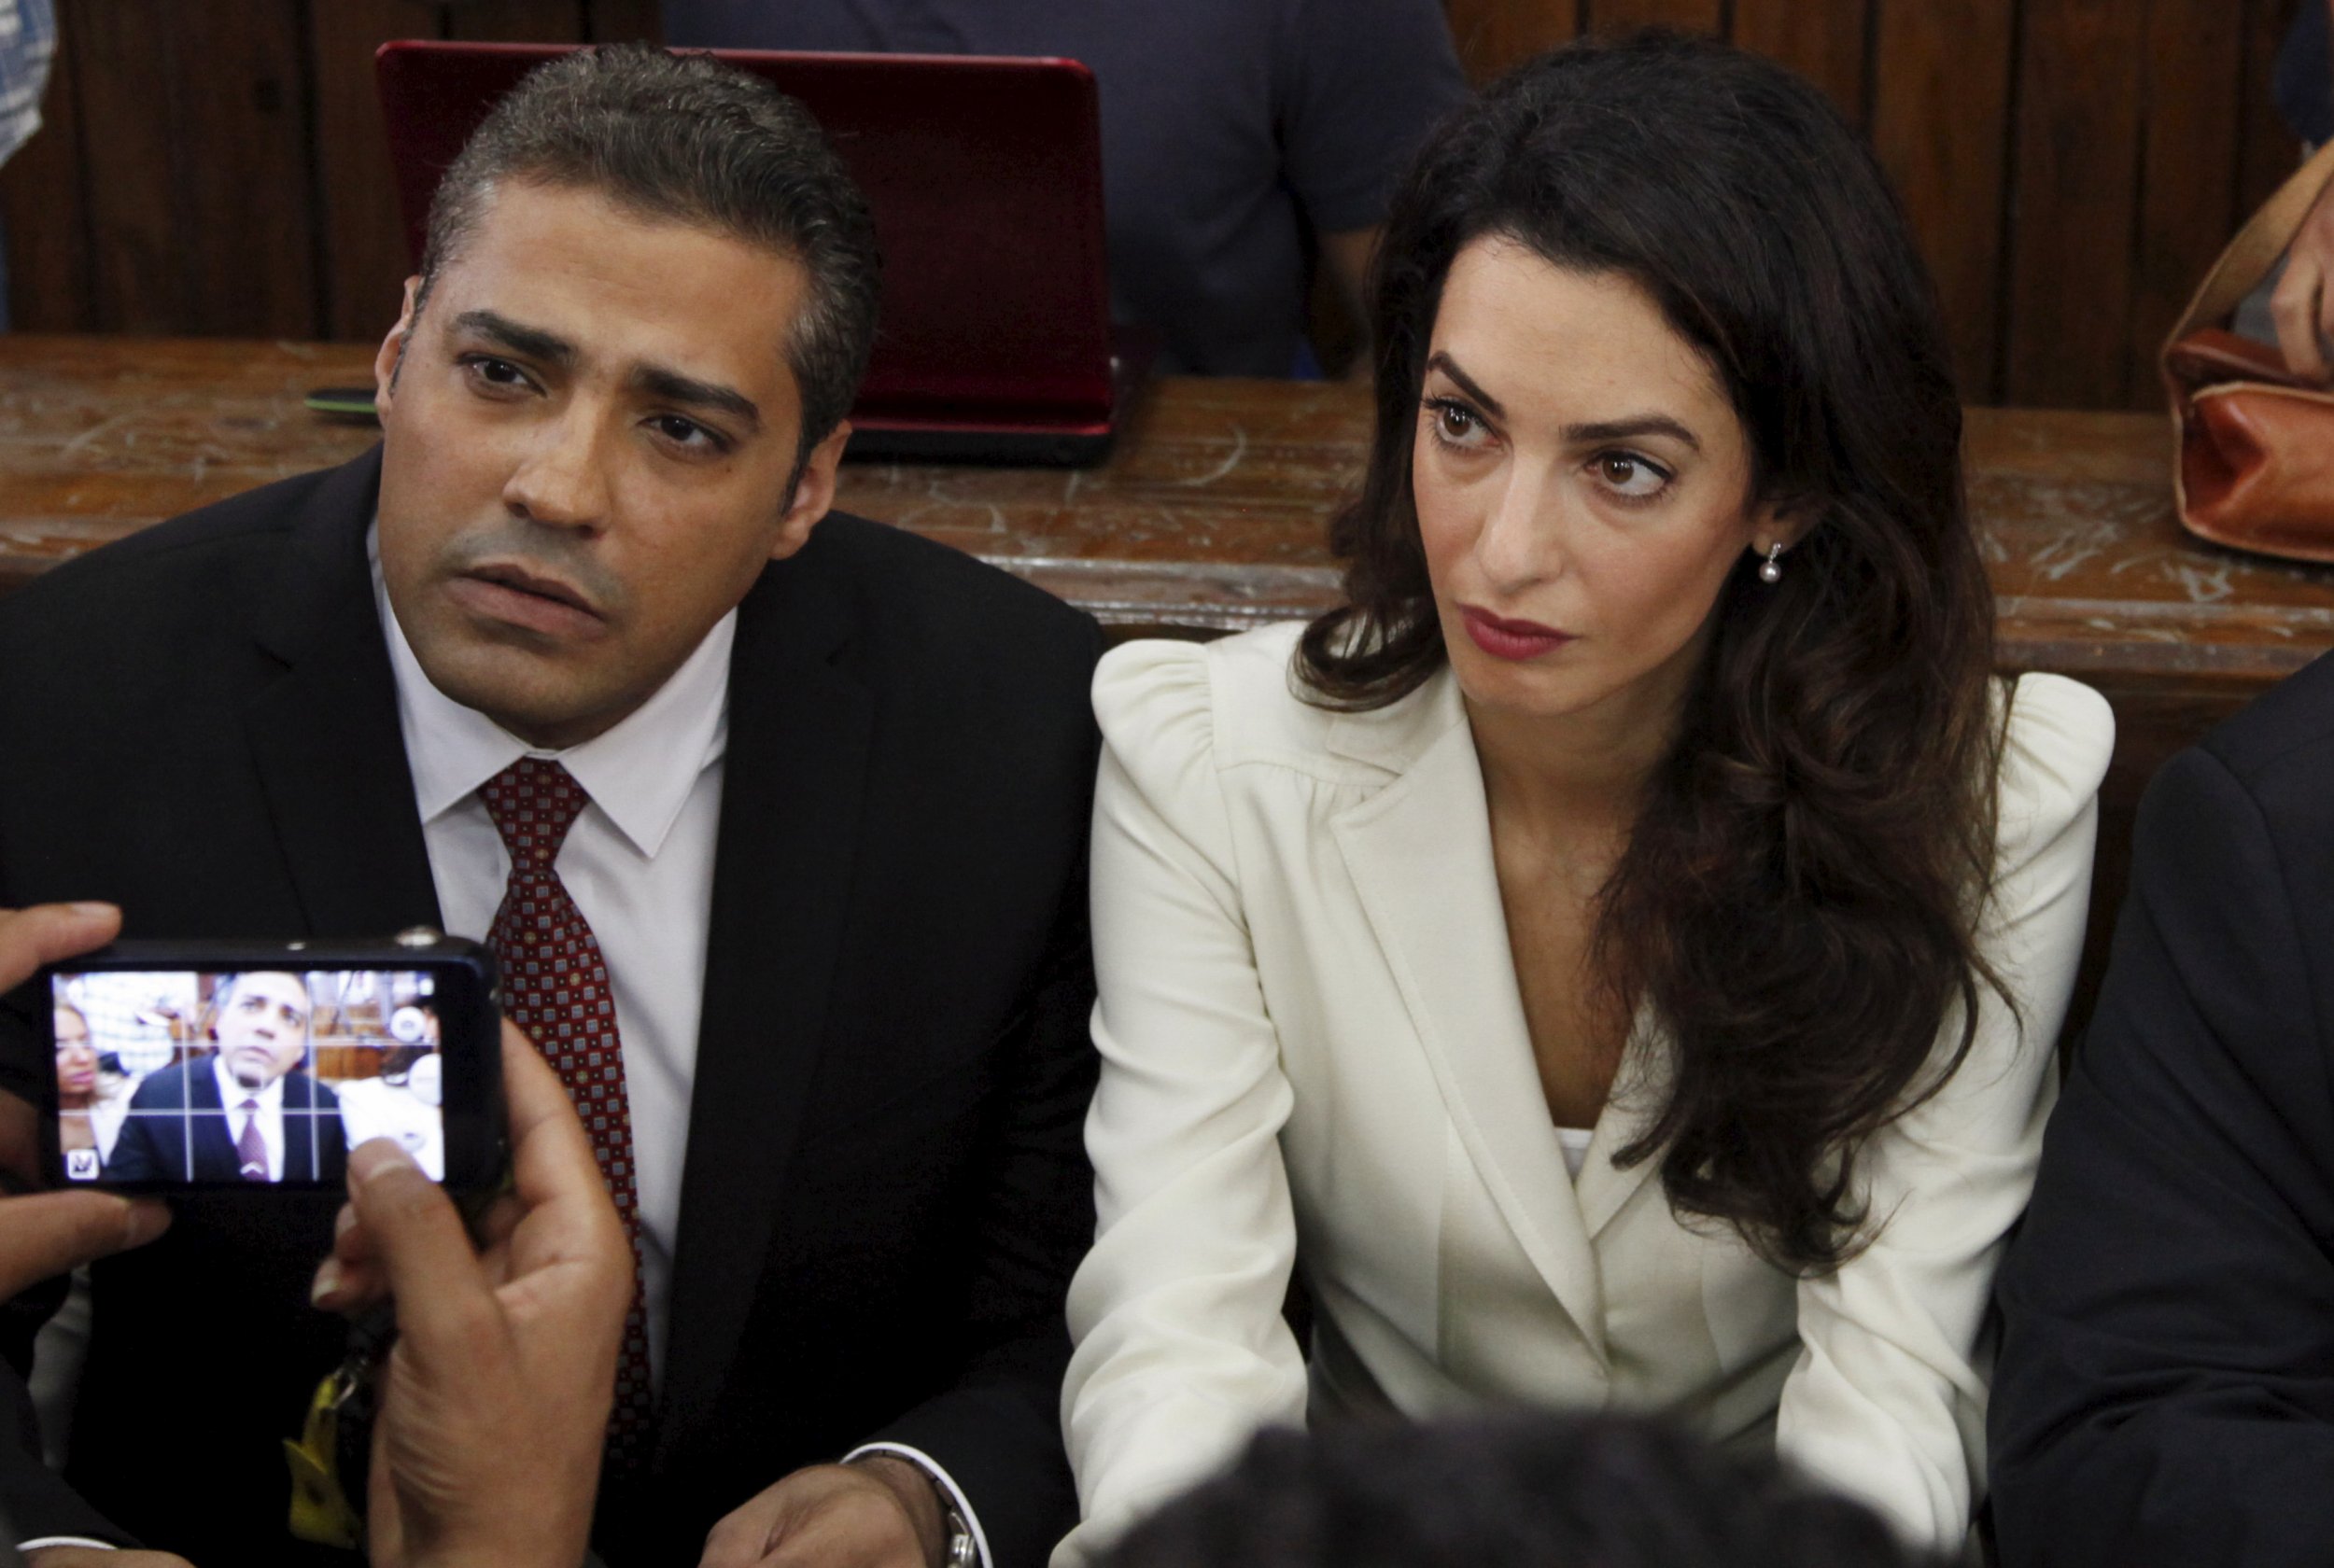 Mohamed Fahmy and Amal Clooney